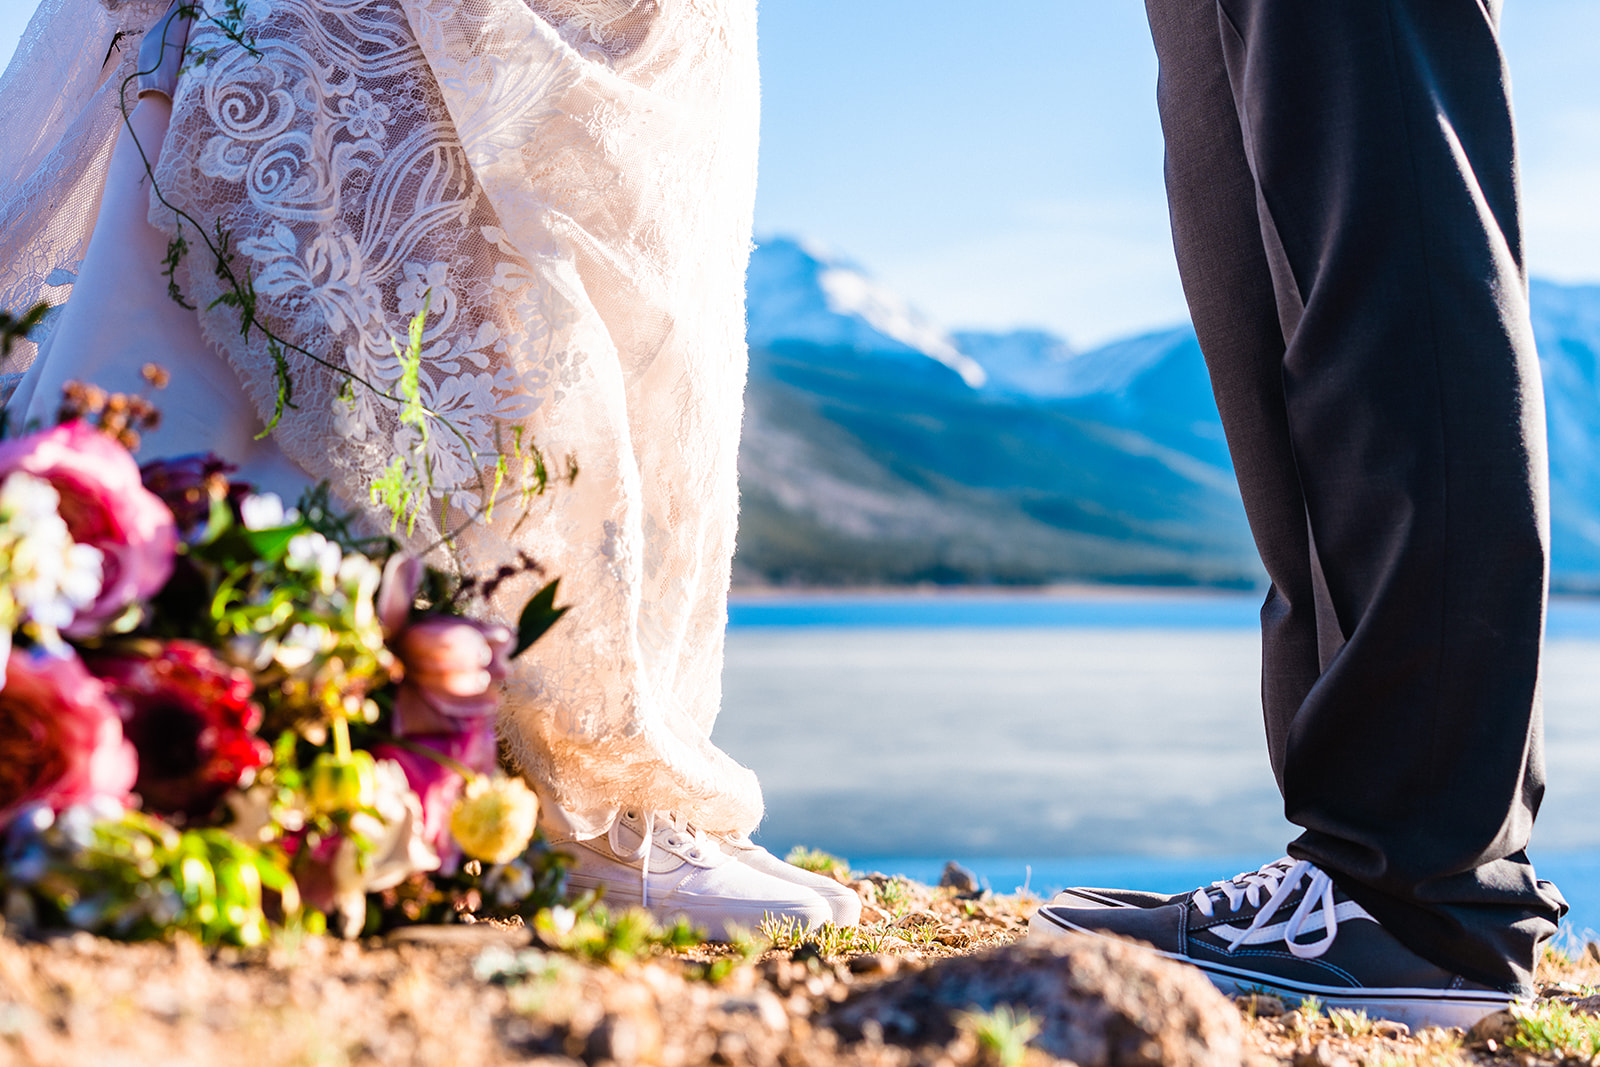 Intimate Twin Lakes elopement in the Colorado Mountains